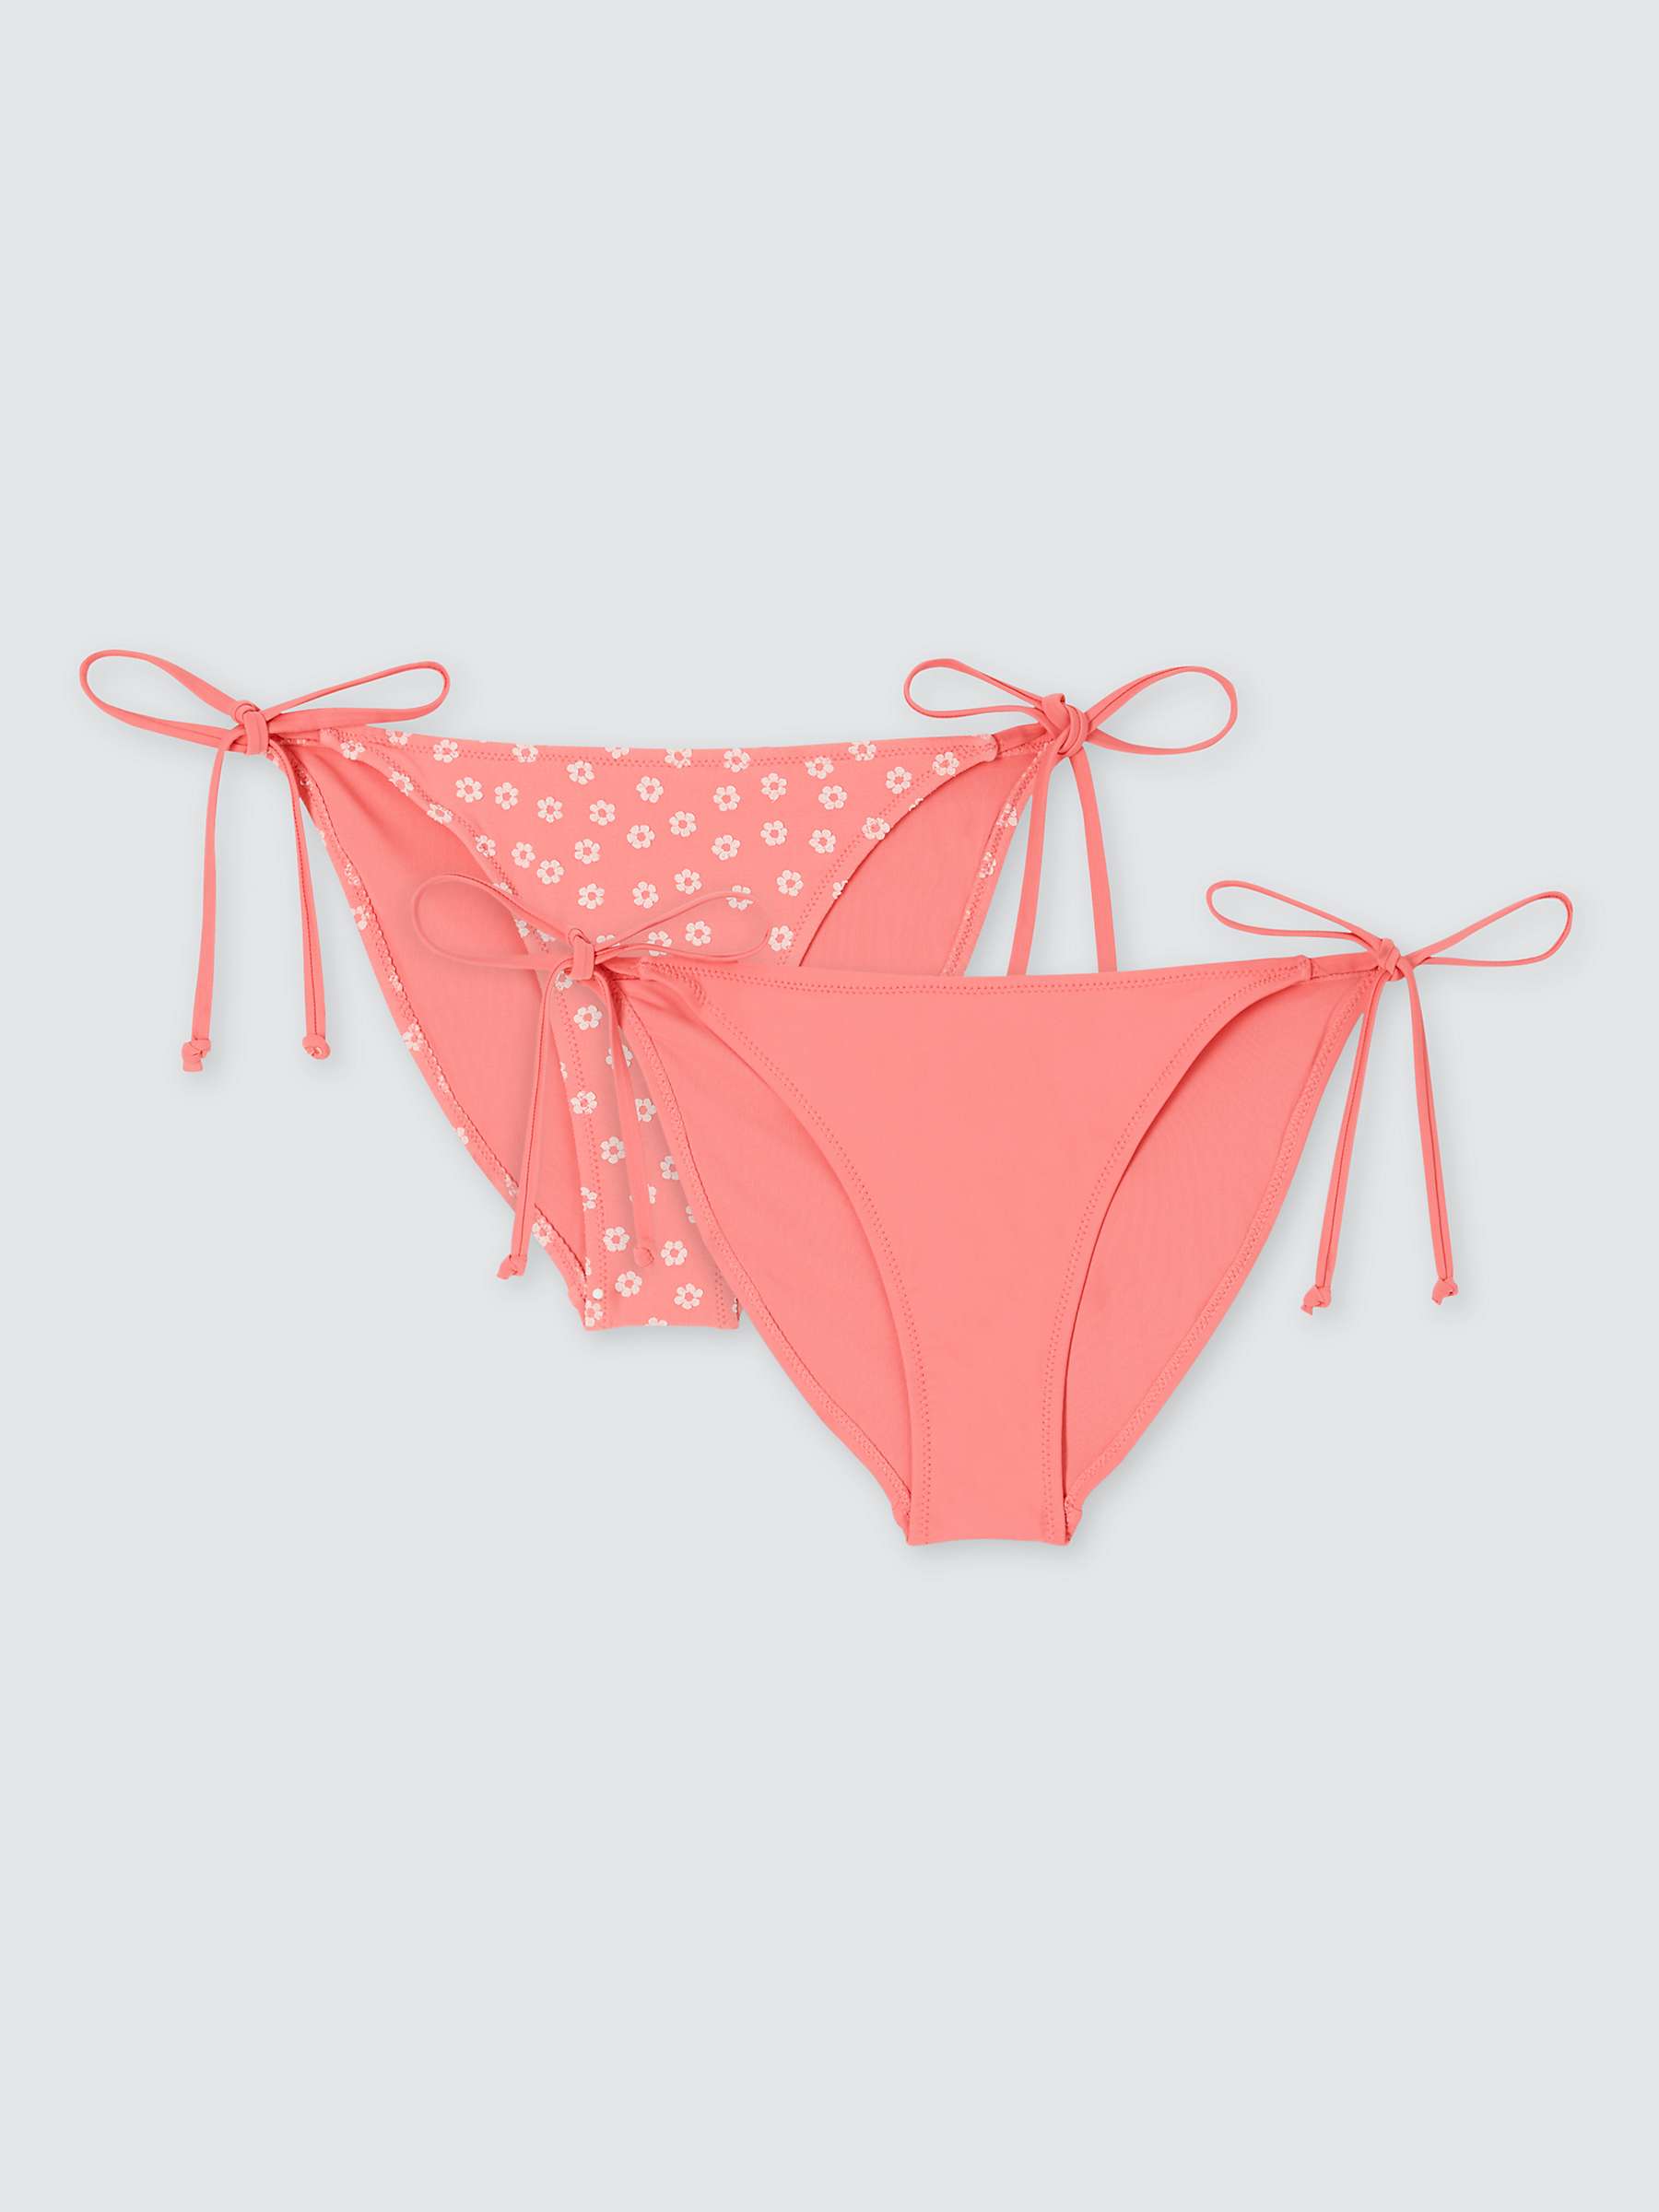 Buy John Lewis ANYDAY Jacquard Flower Bikini Bottoms, Pack of 2, Bright Coral Online at johnlewis.com